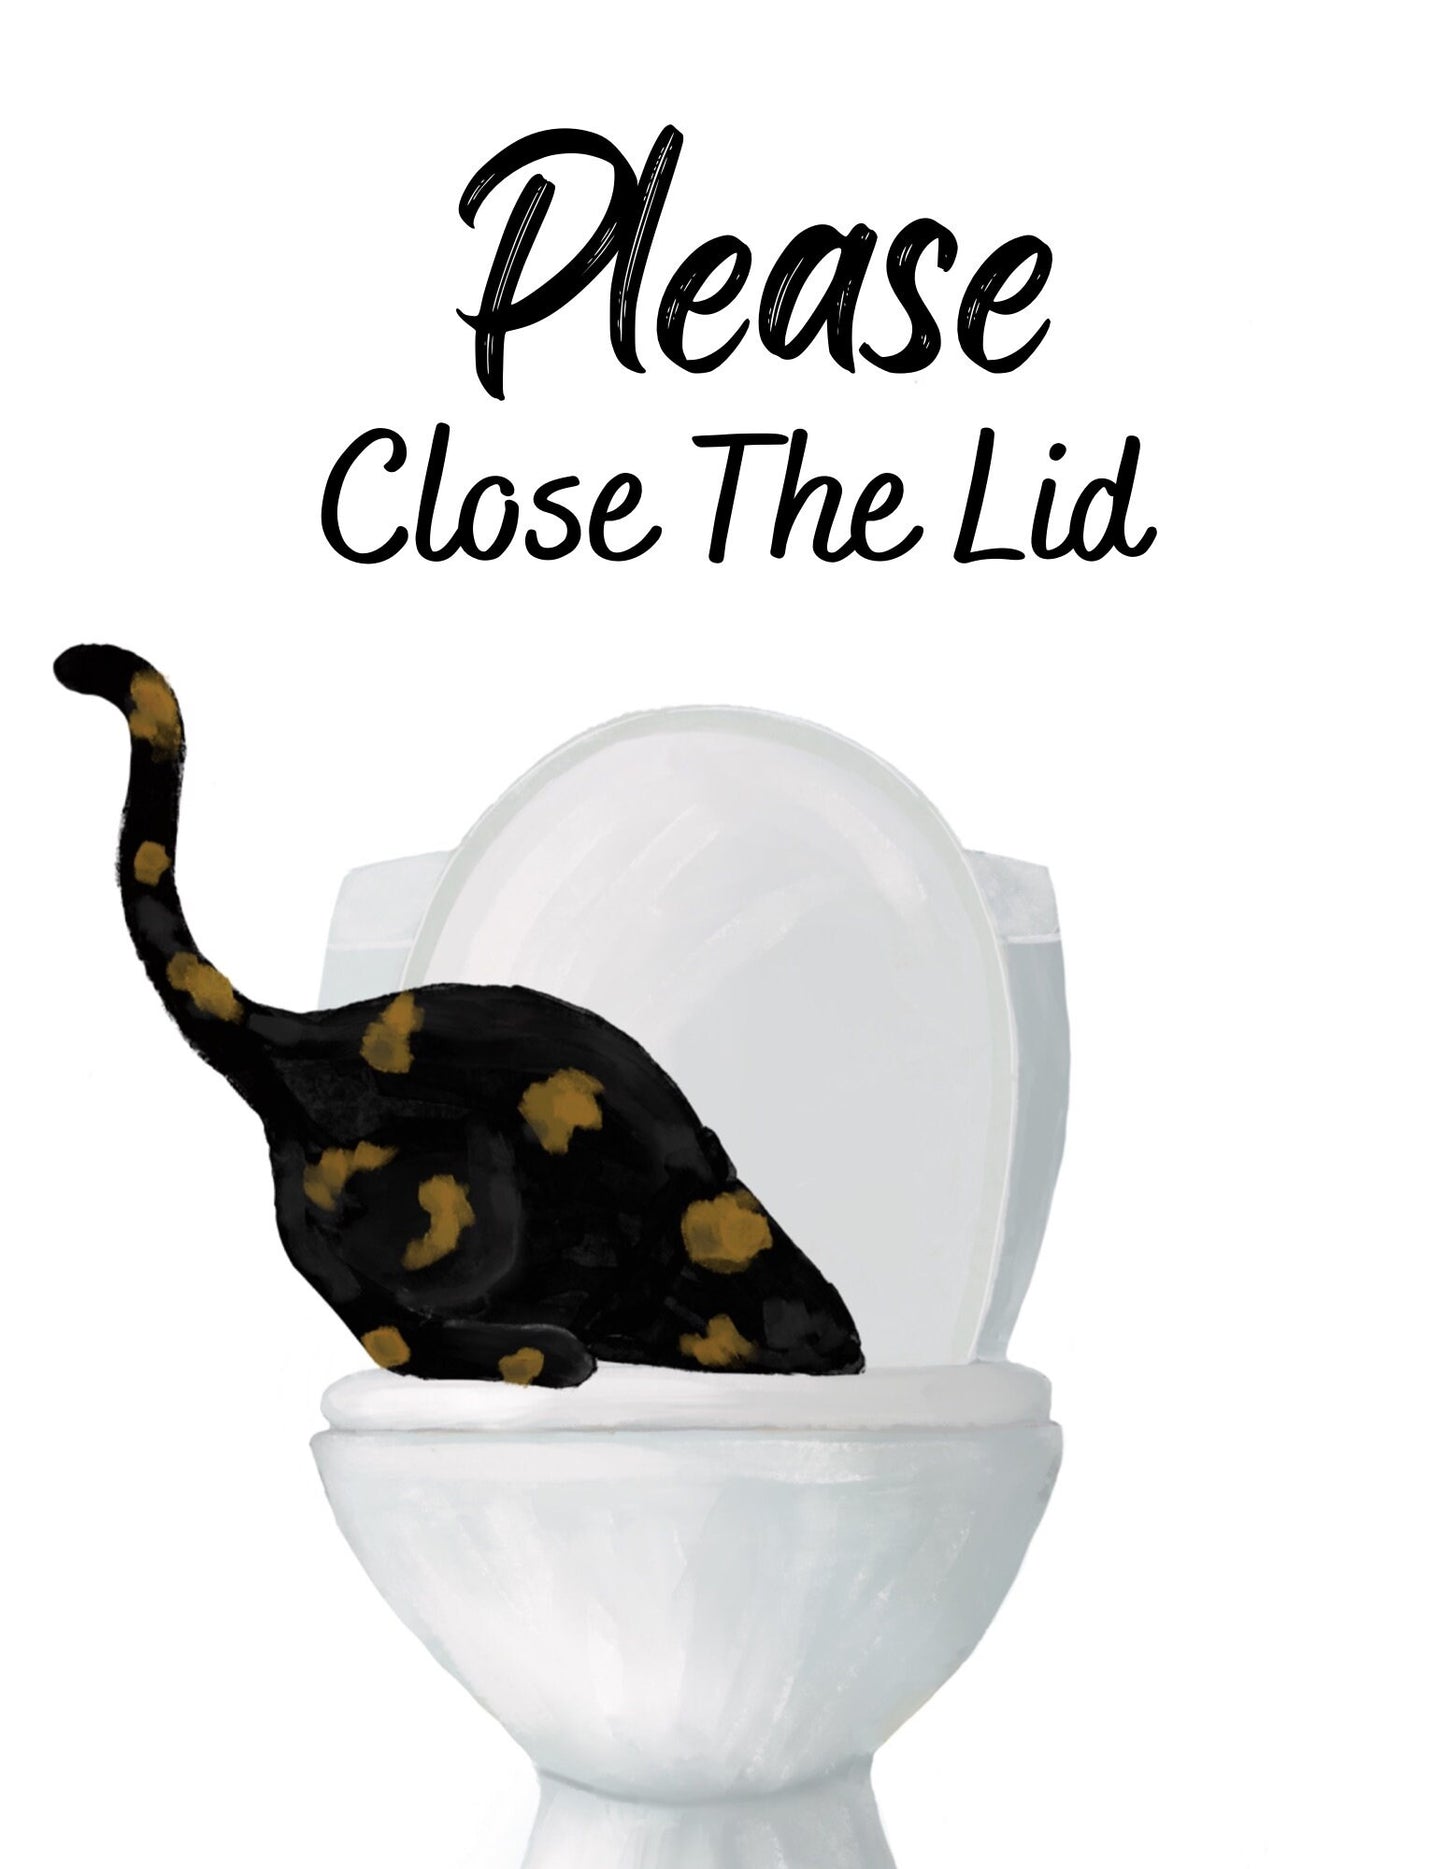 Tortoiseshell Cat Drinking Water From Toilet Sign, Fat Tortie Cat Print, Bathroom Decor, Cat Painting, Kitty Licking Water From Toilet Art,